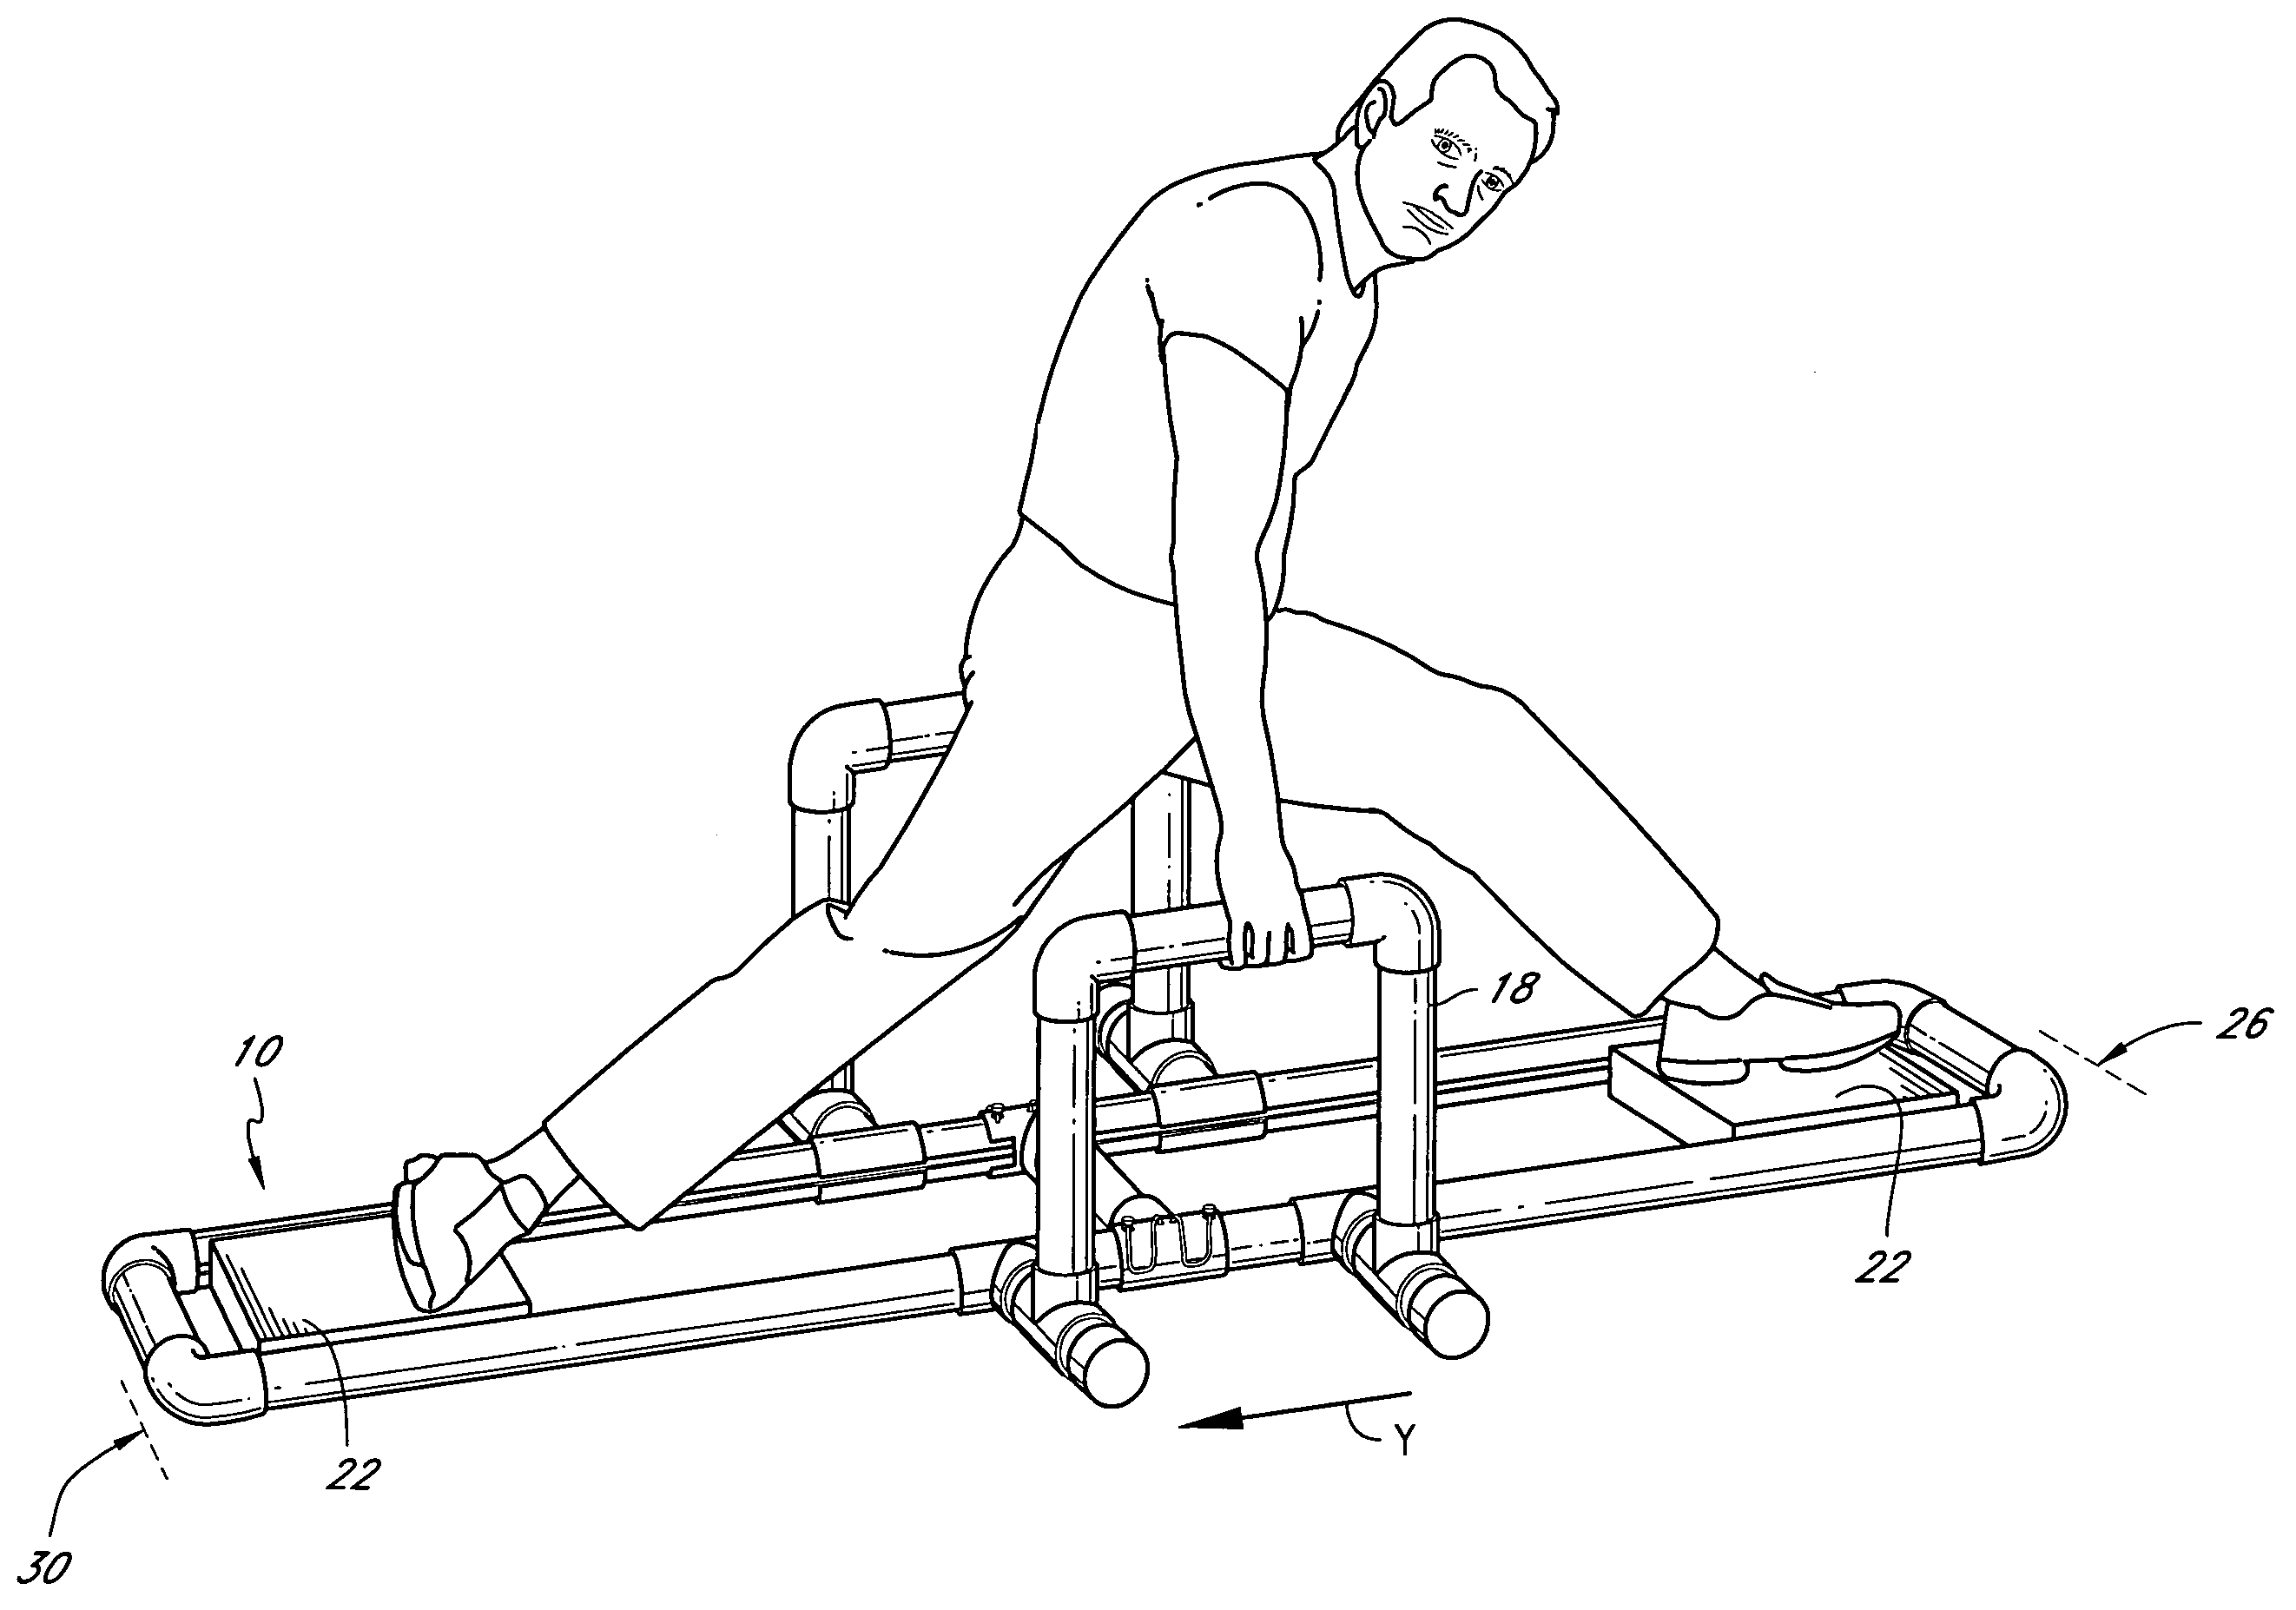 Stretching and exercise apparatus